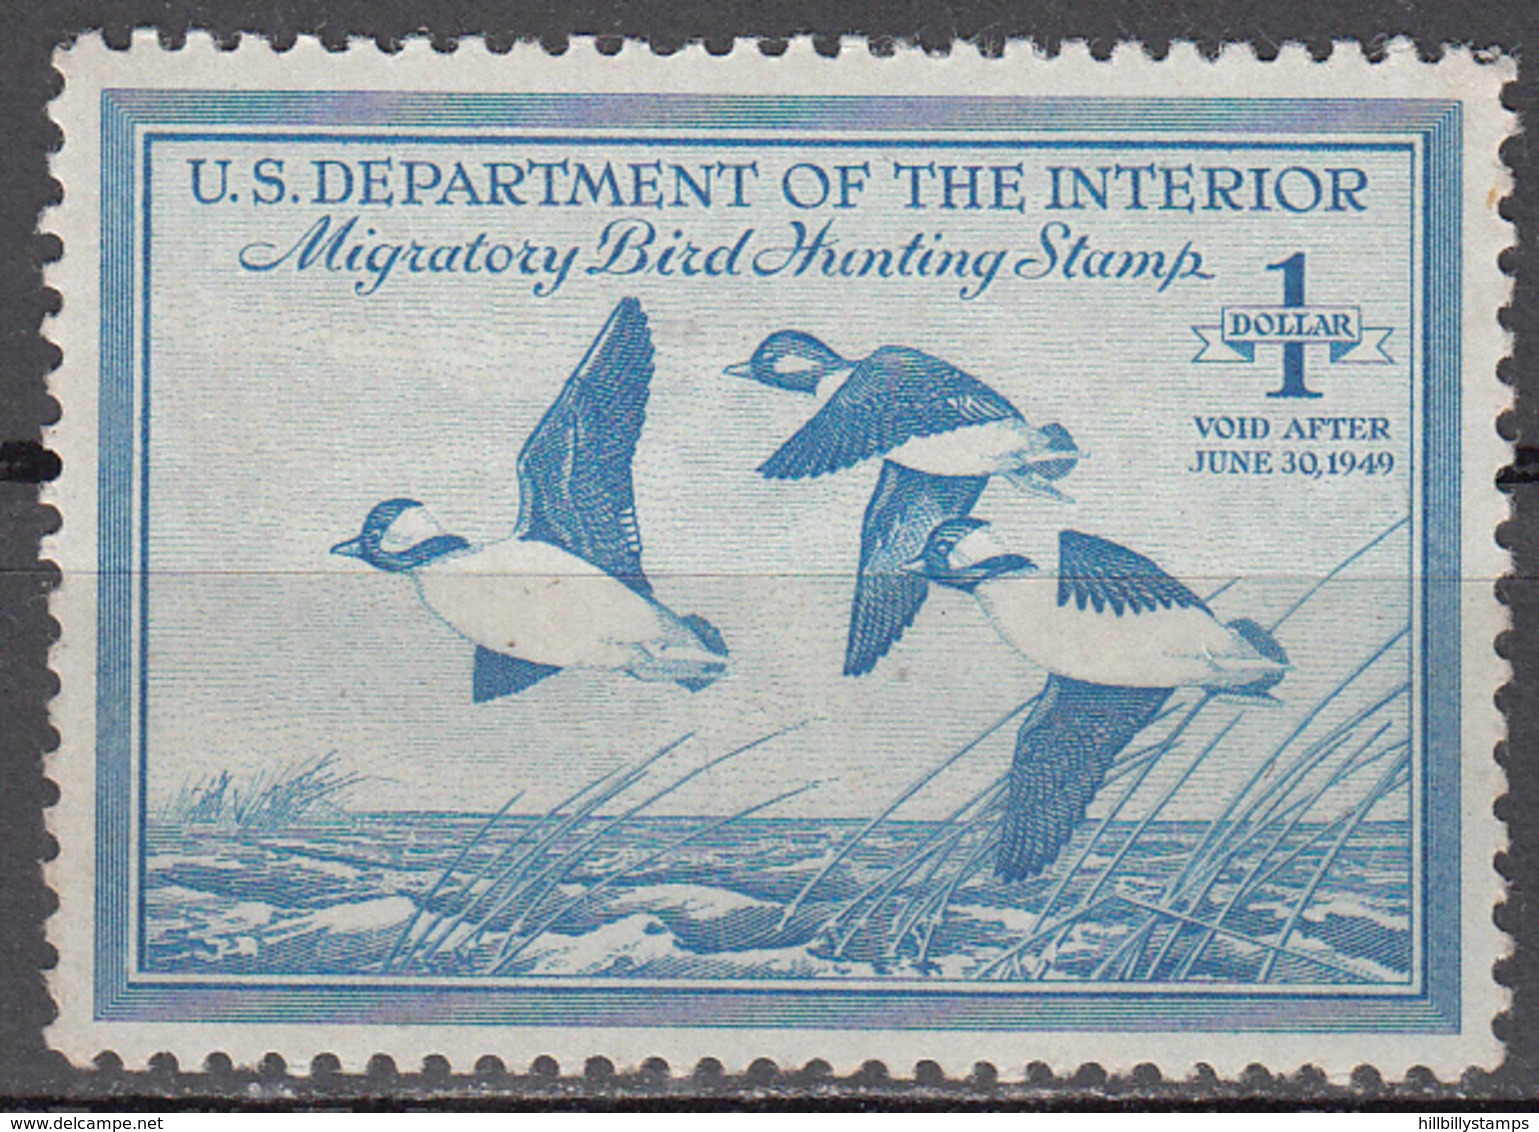 UNITED STATES   SCOTT NO. RW15    MINT HINGED     YEAR  1948 - Duck Stamps